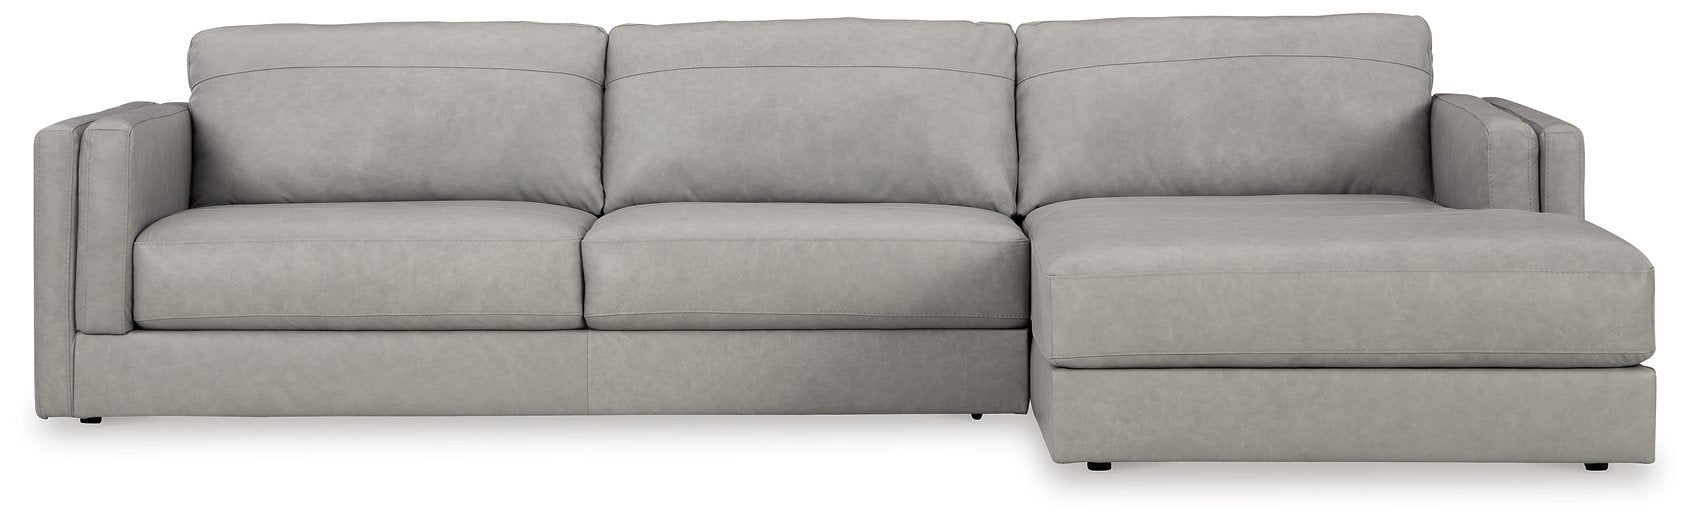 Amiata Sectional with Chaise - Half Price Furniture